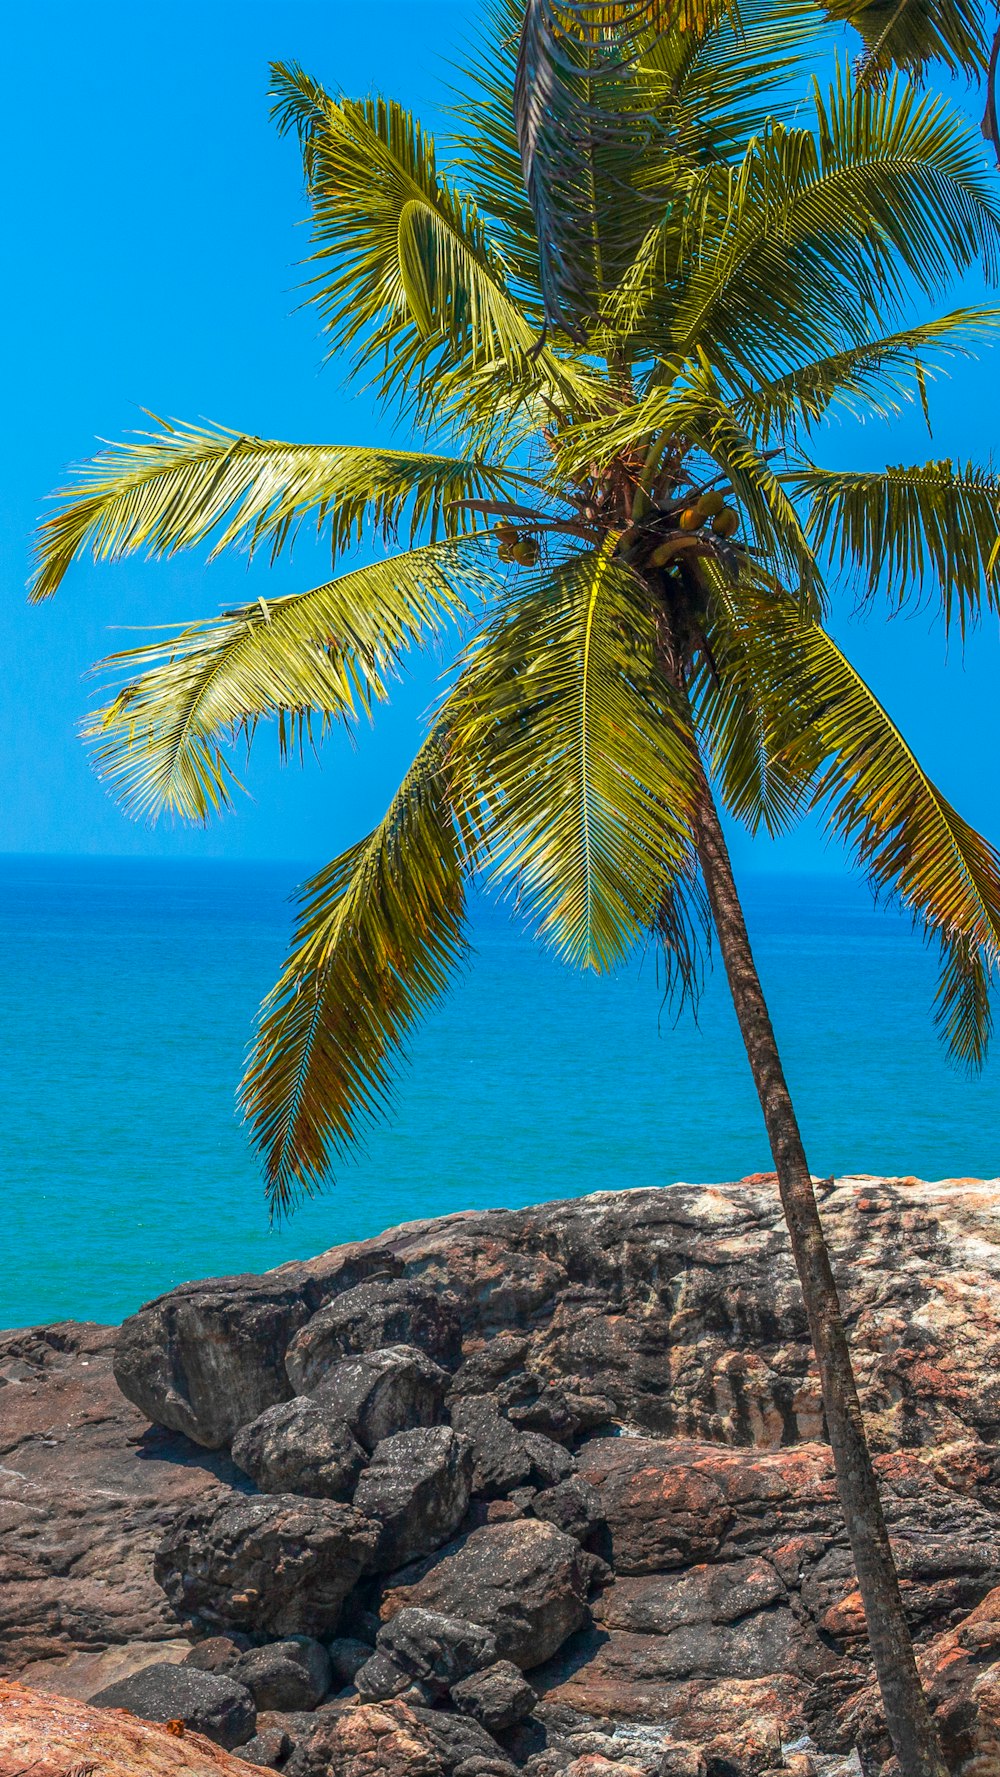 a palm tree on a rocky beach with the ocean in the background